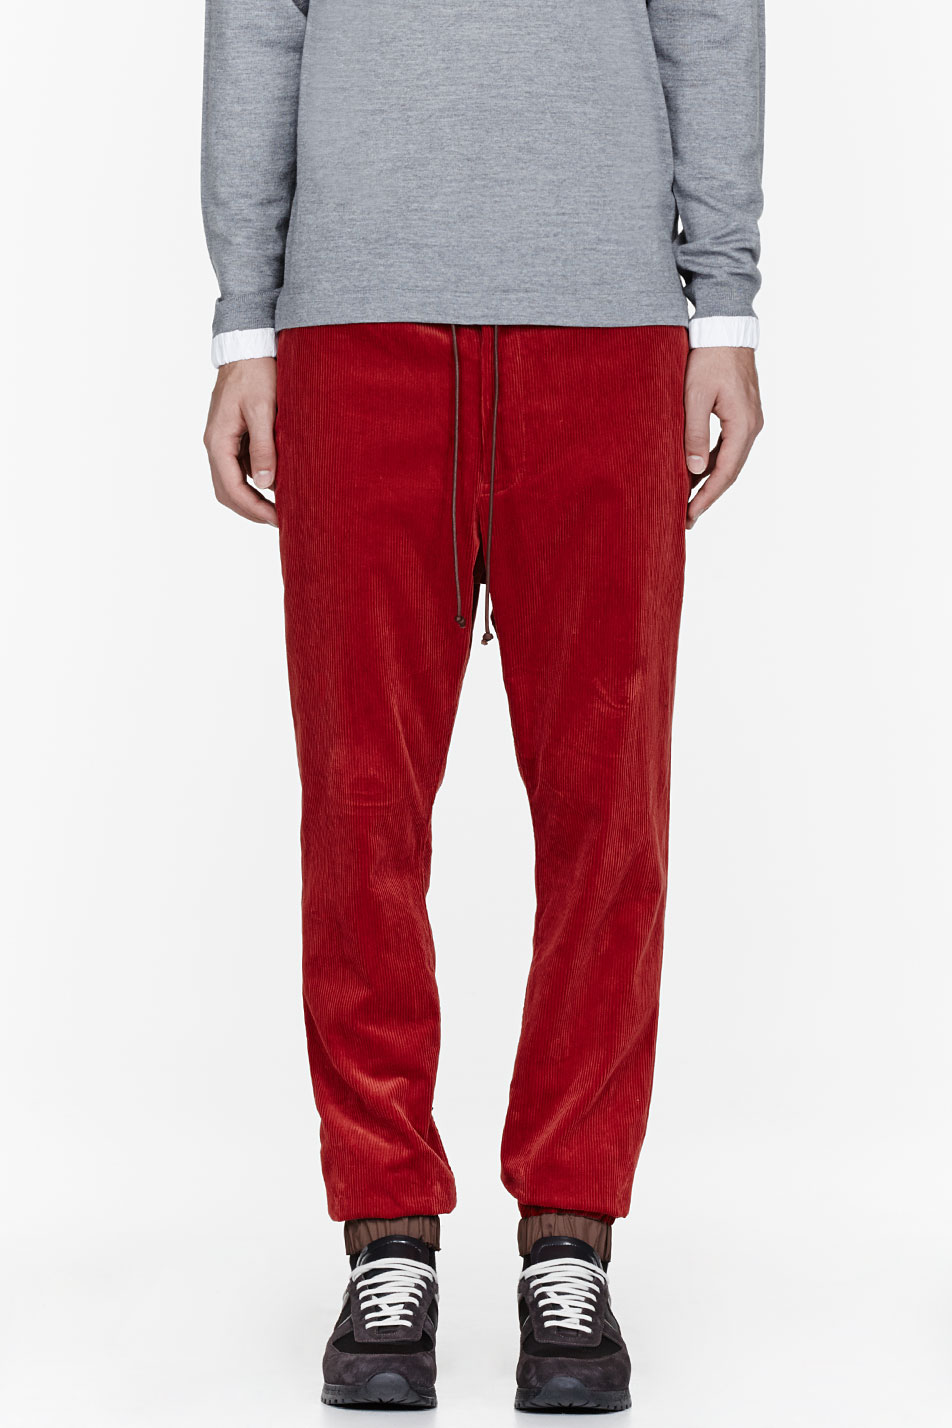 Lyst - Sacai Red Corduroy Lounge Pants in Red for Men